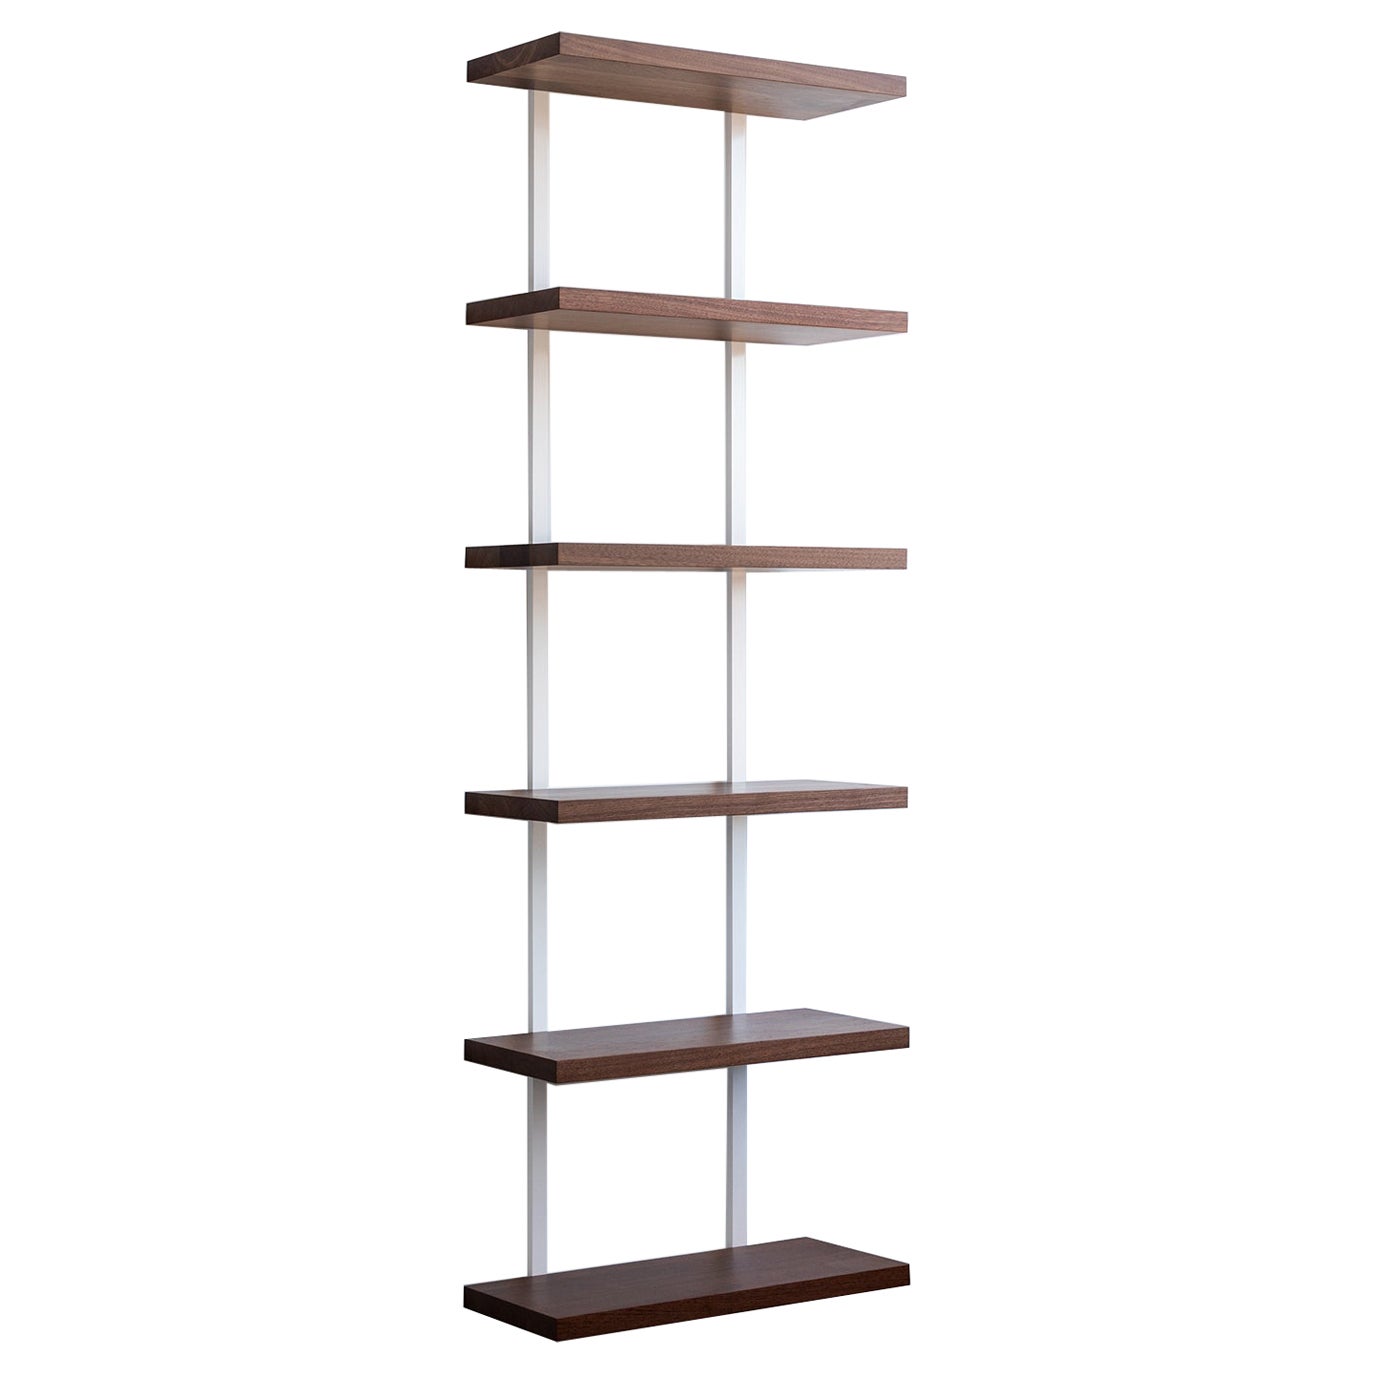 AS6 wall unit 24" wide shelves in solid walnut and powder coated steel For Sale